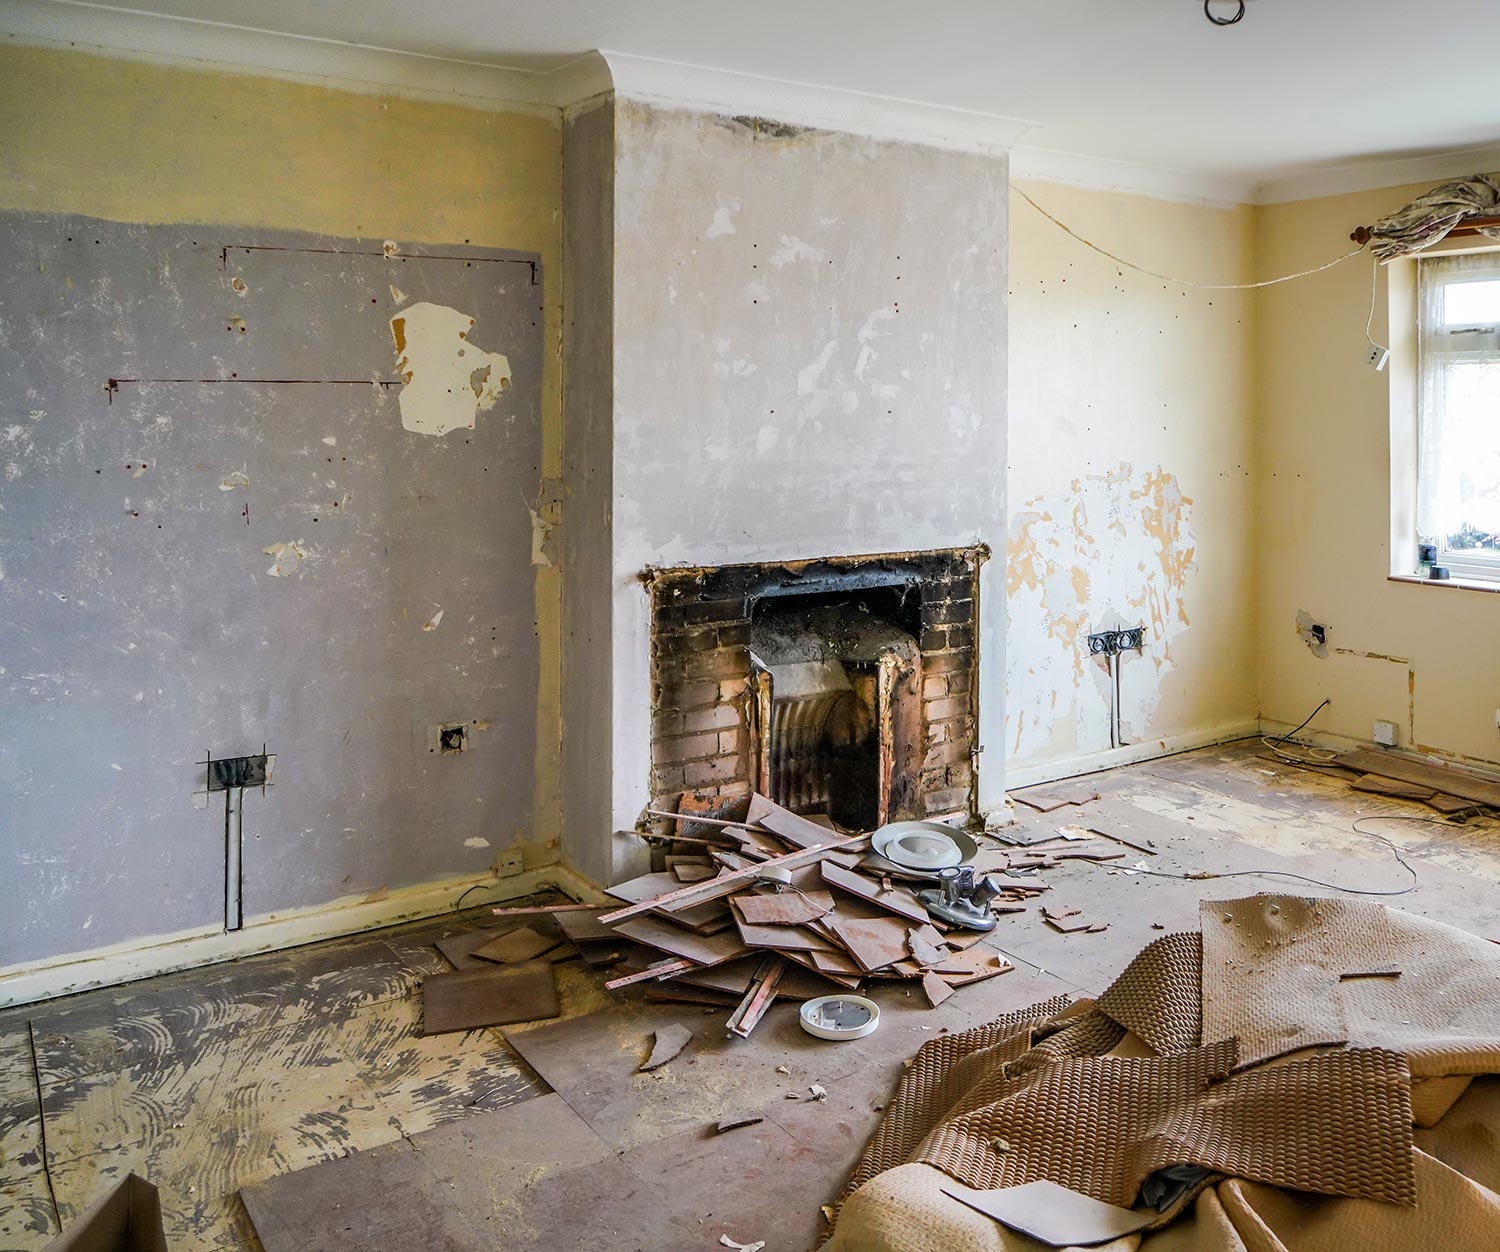 Fireplace removed from the chimney breast